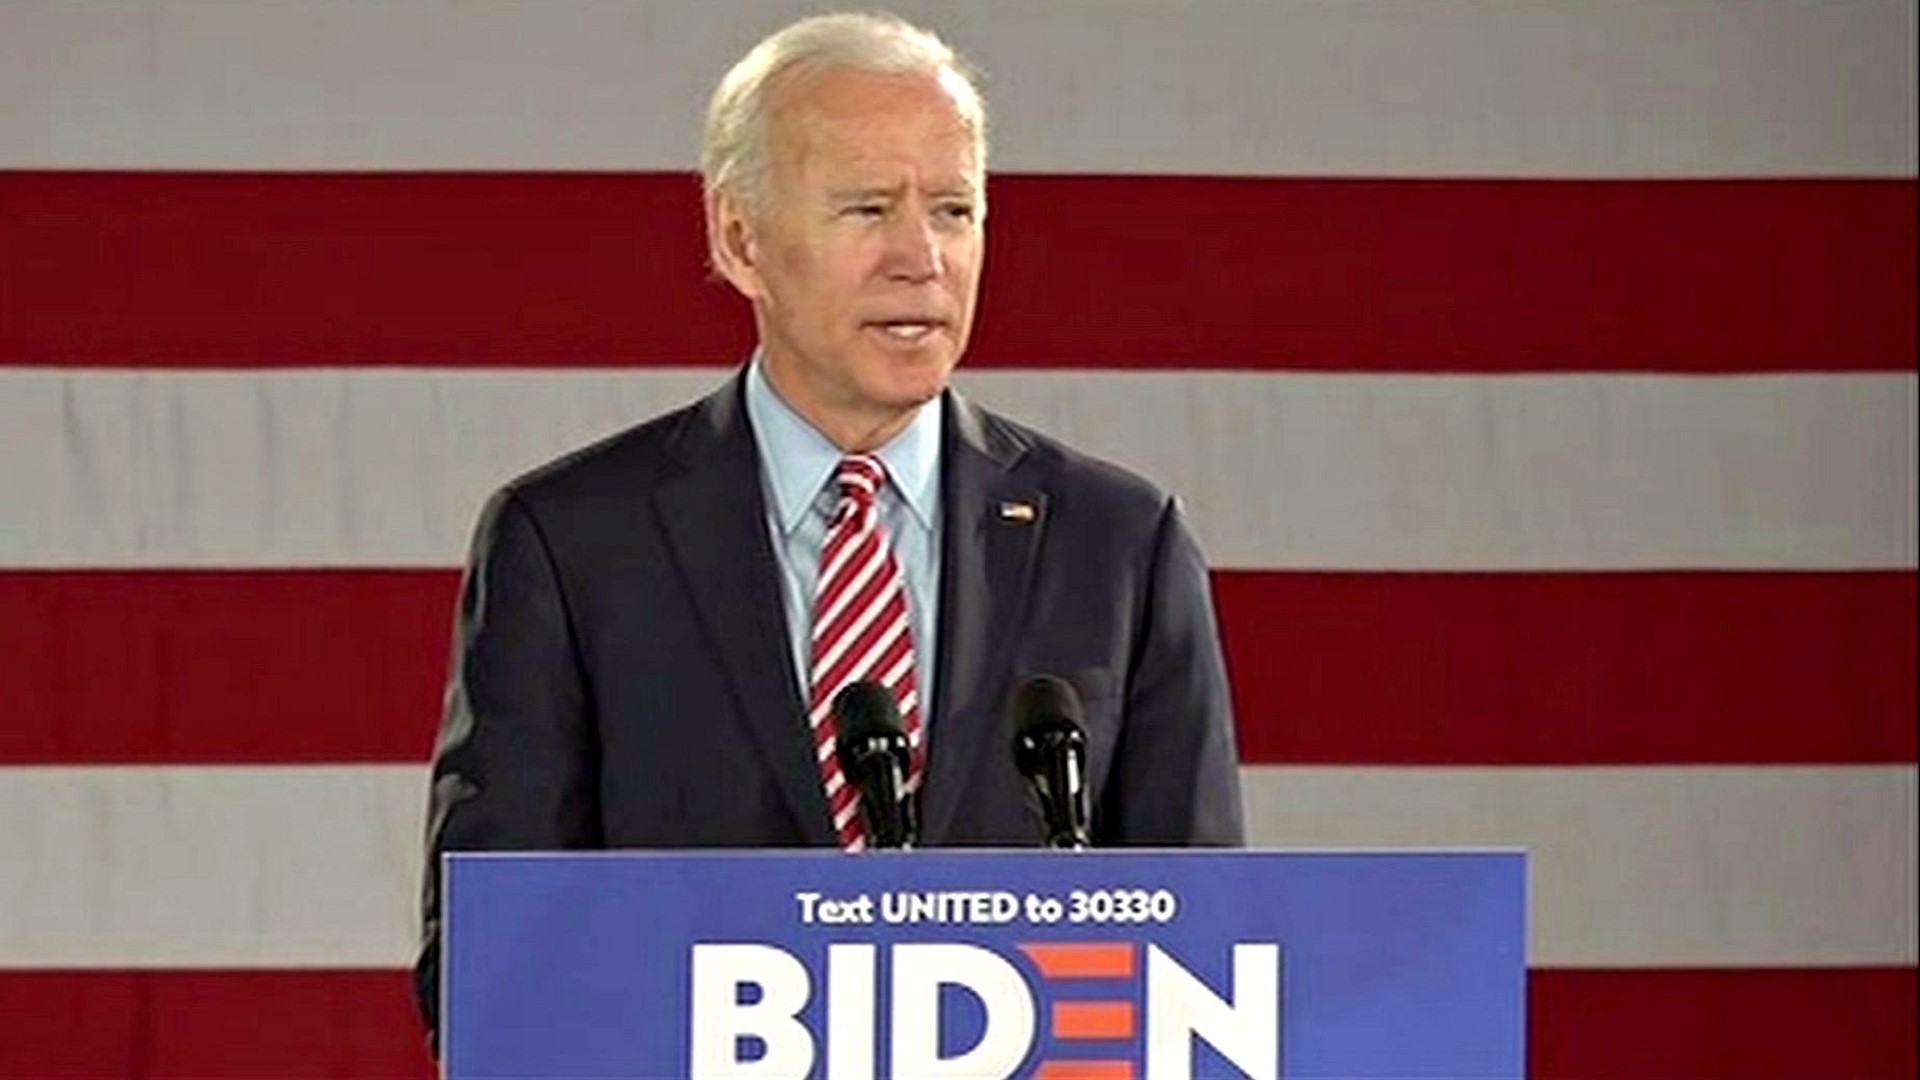 Biden is set to visit McGregor Industries in Dunmore on Thursday afternoon and talk to employees there about the economy.